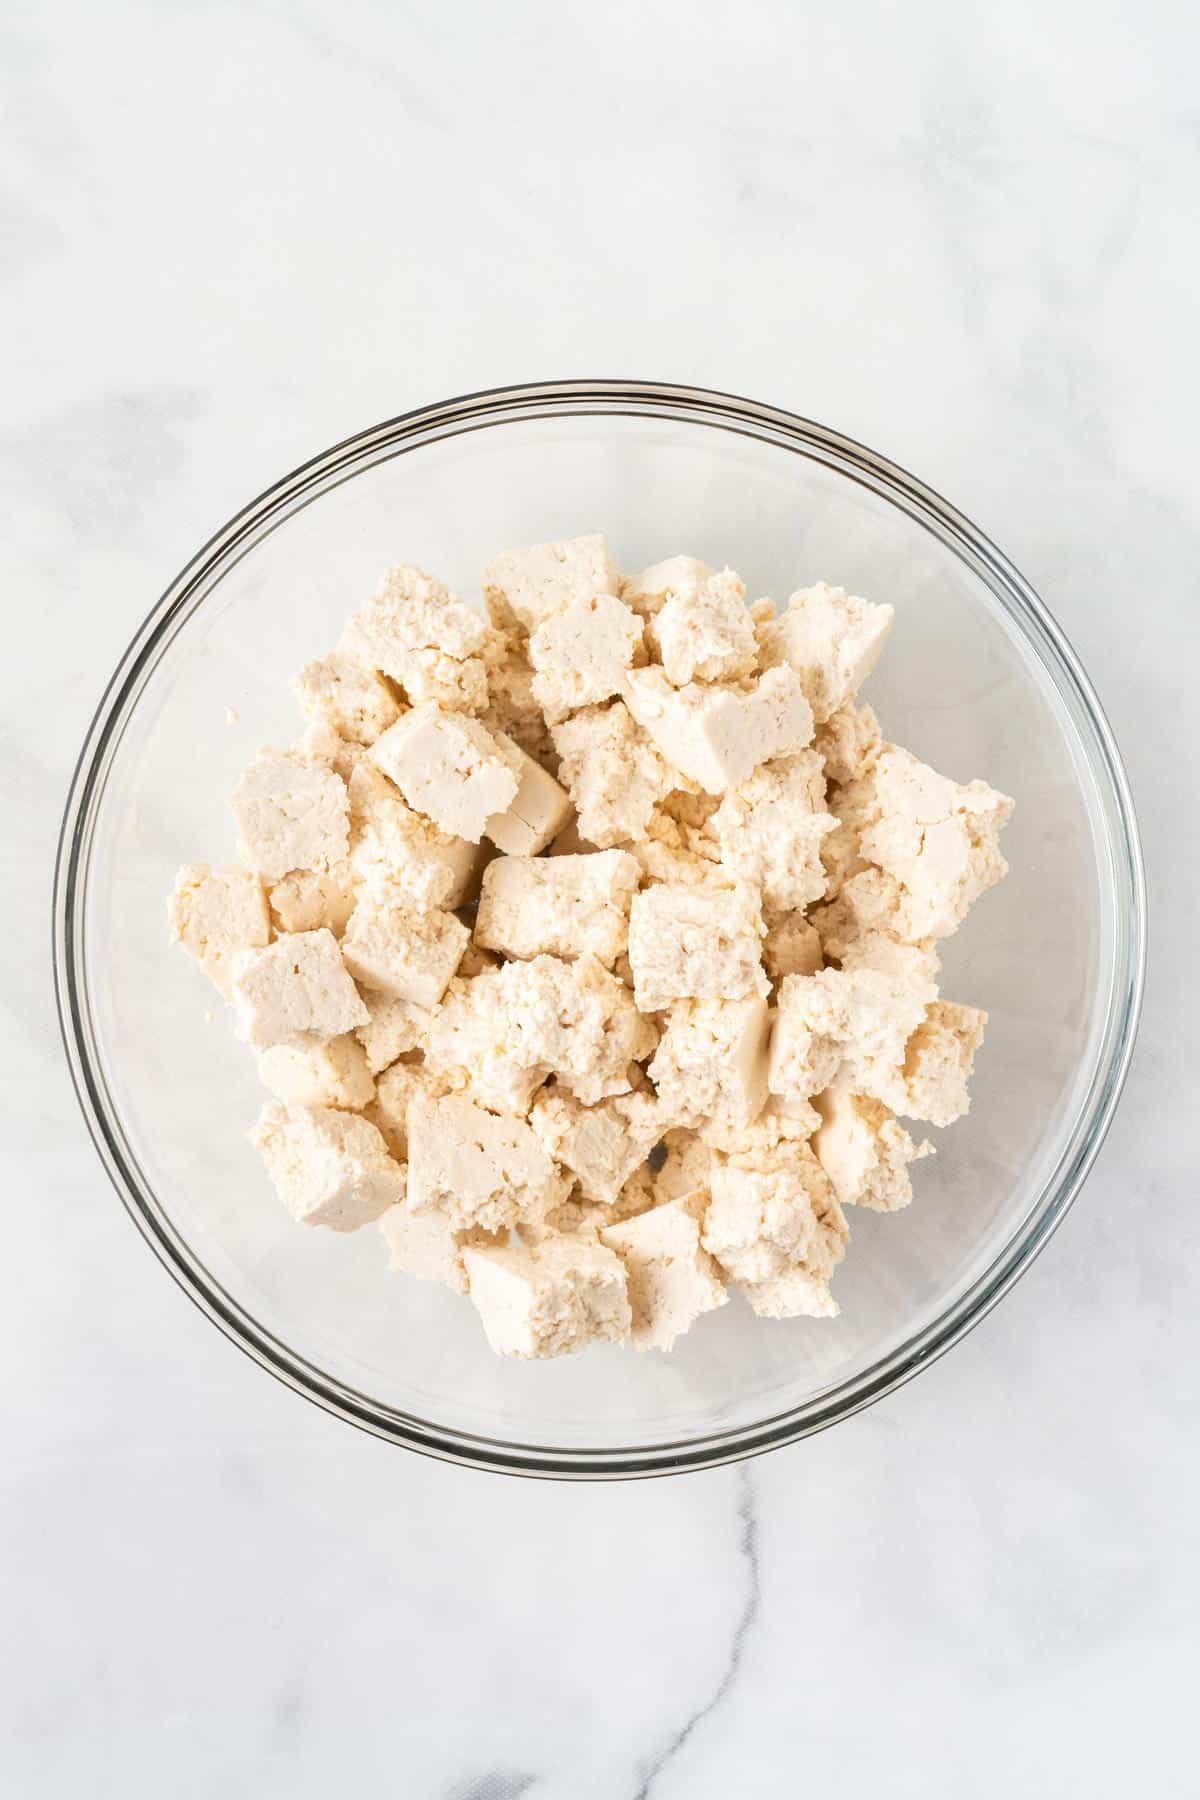 A picture of torn tofu in a clear bowl.